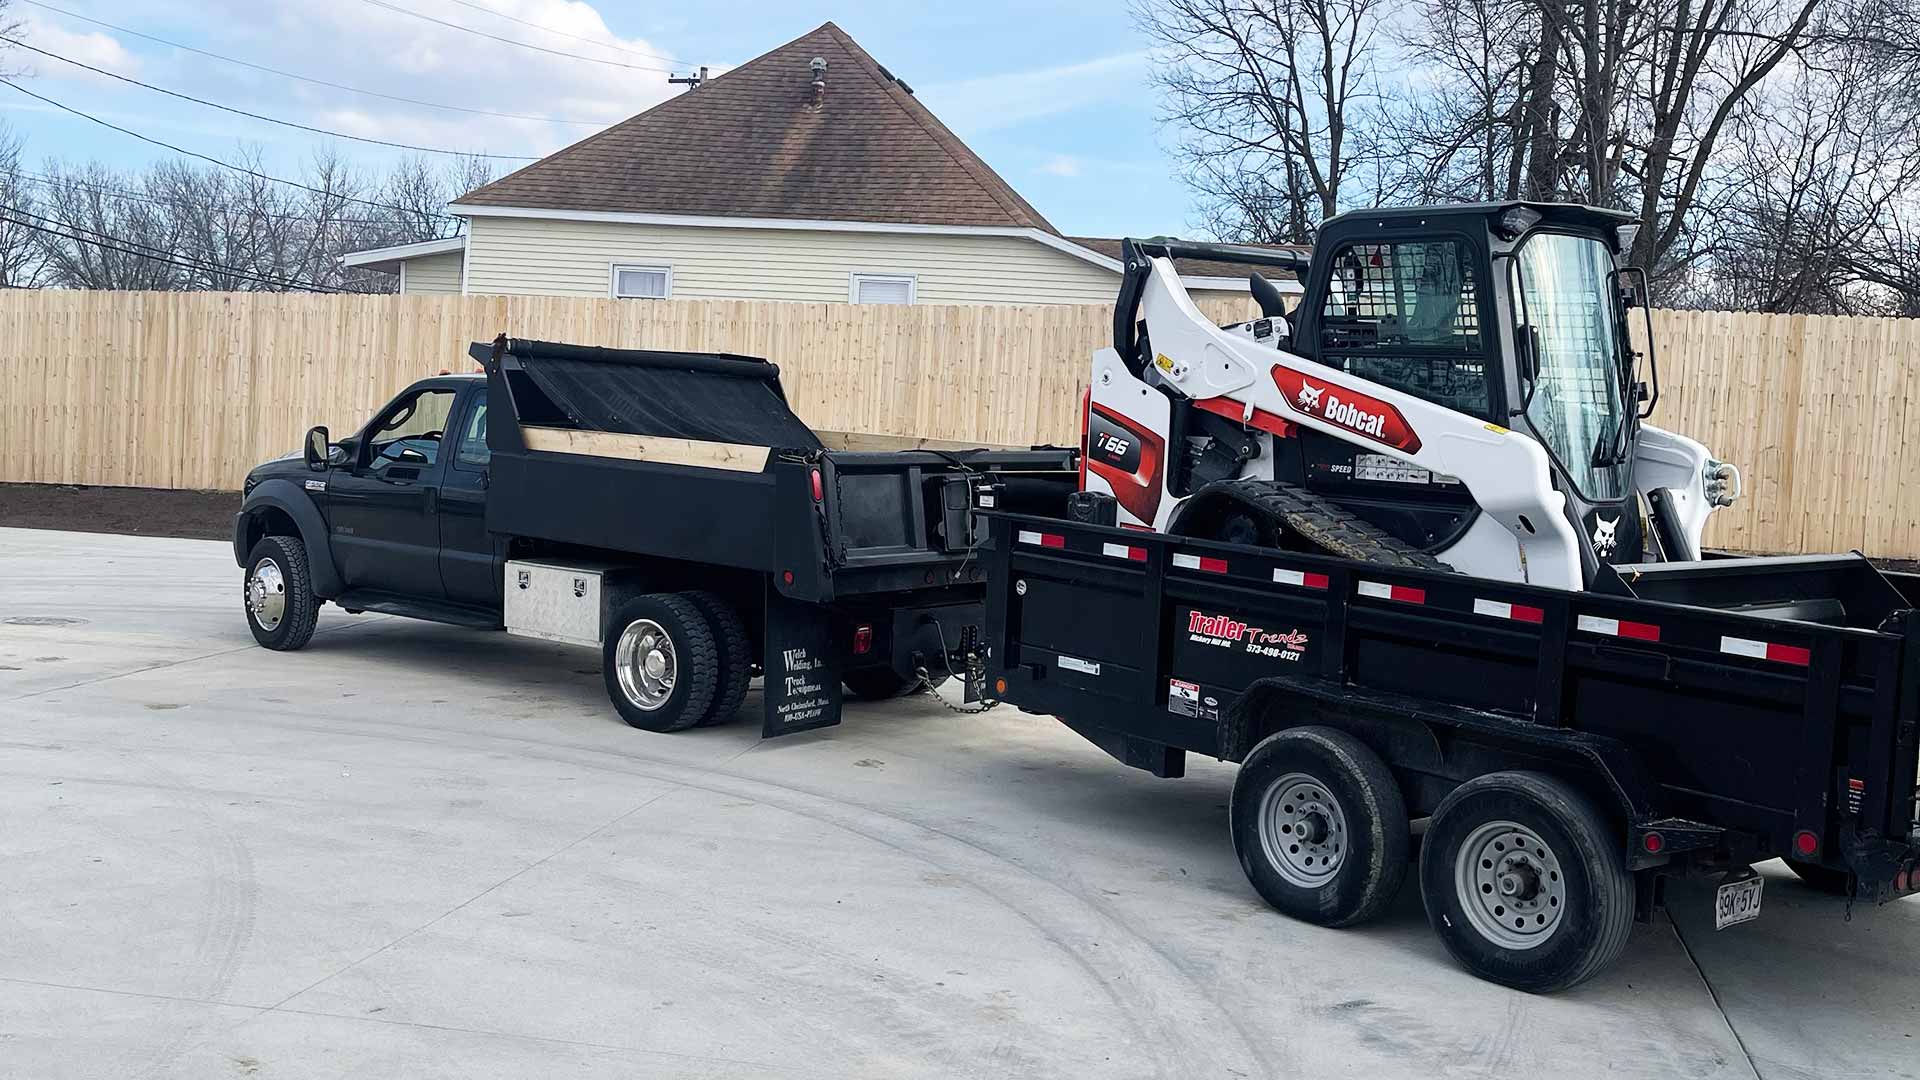 McVey Mowing work truck and trailer towing equipment to a landscaping job in Columbia, MO.